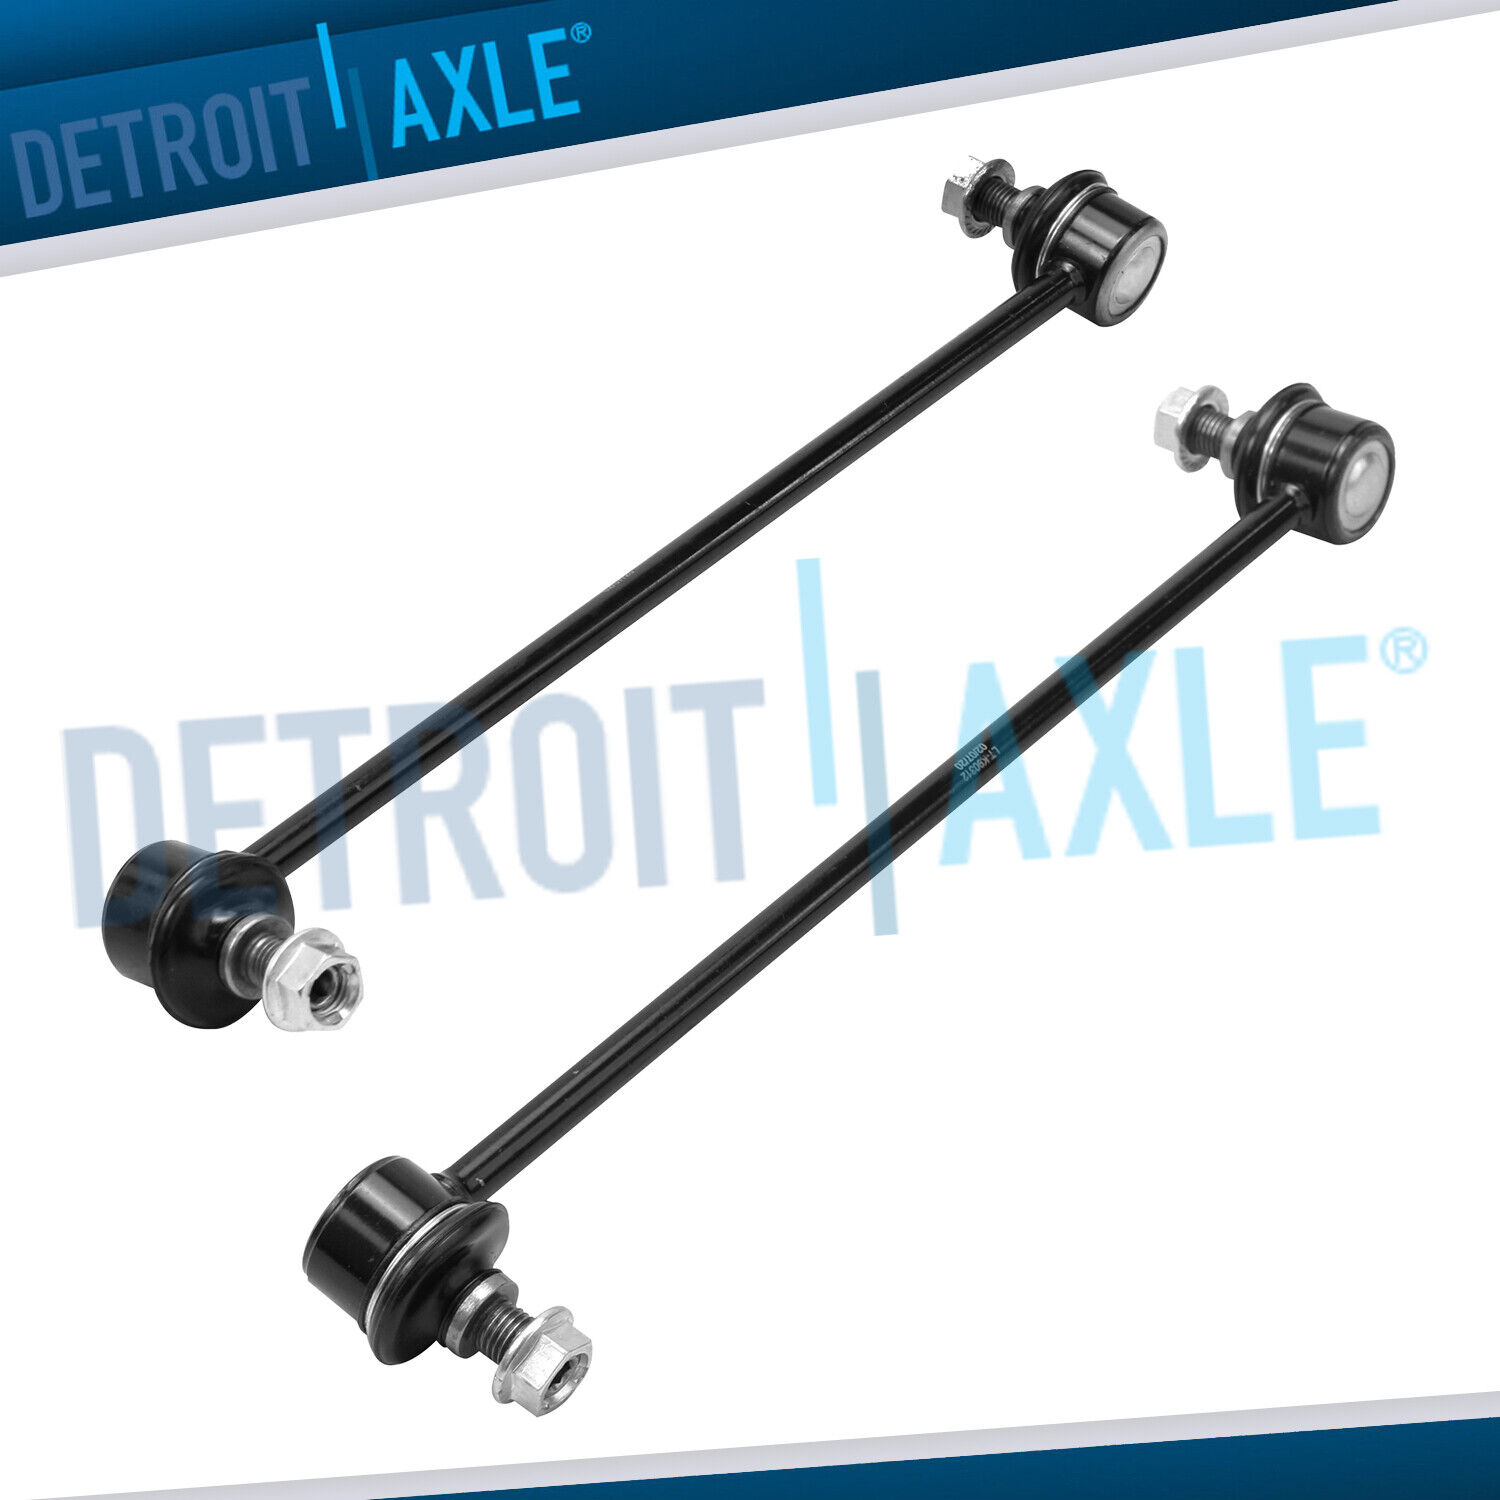 Pair (2) Front Sway Bar Link for Toyota Avalon Camry Solara Lexus RX300 ES300 